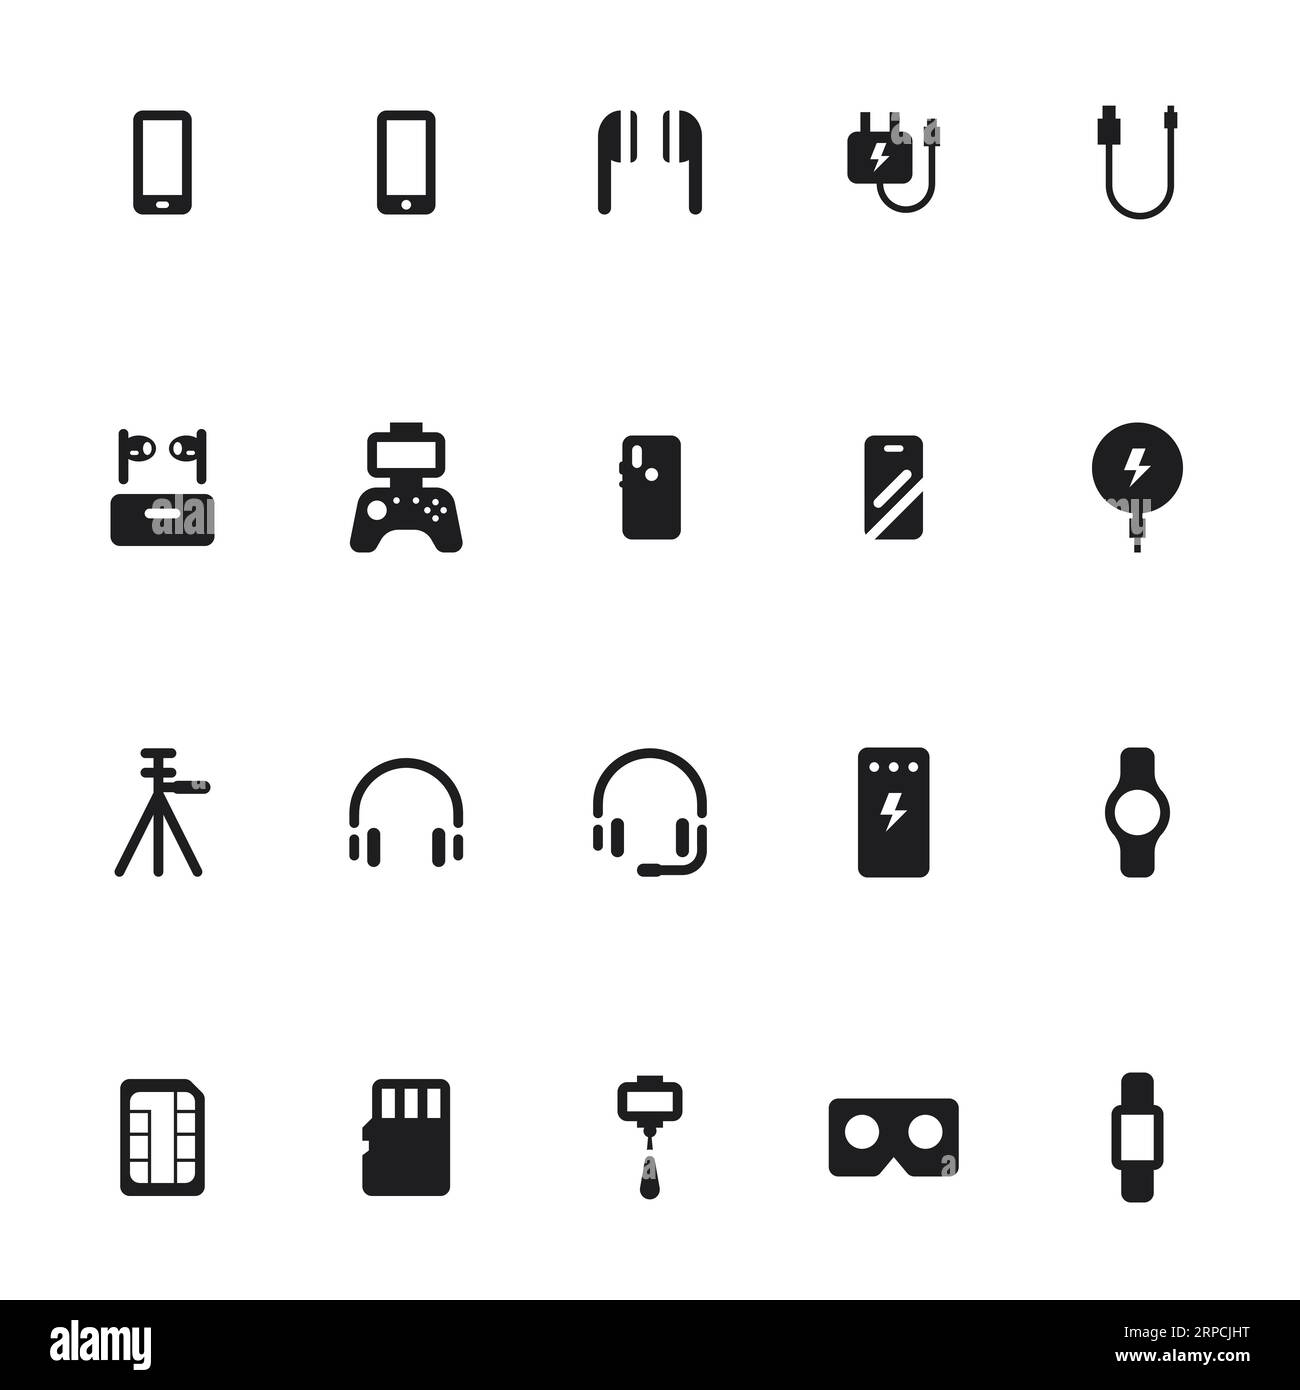 Mobile phone and accessories icons Stock Vector